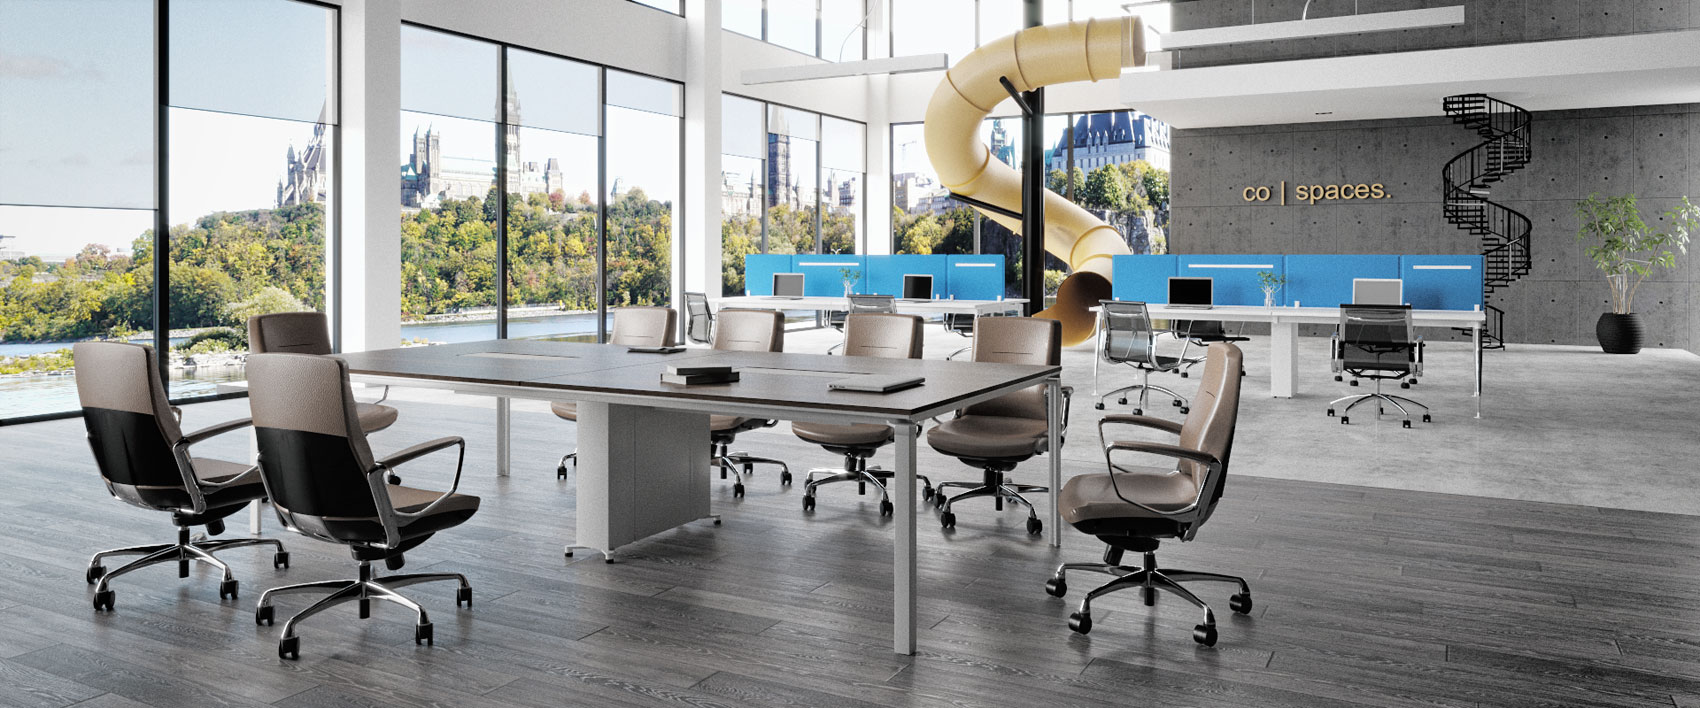 oseries meeting table with liven office chairs in a coworking workspace